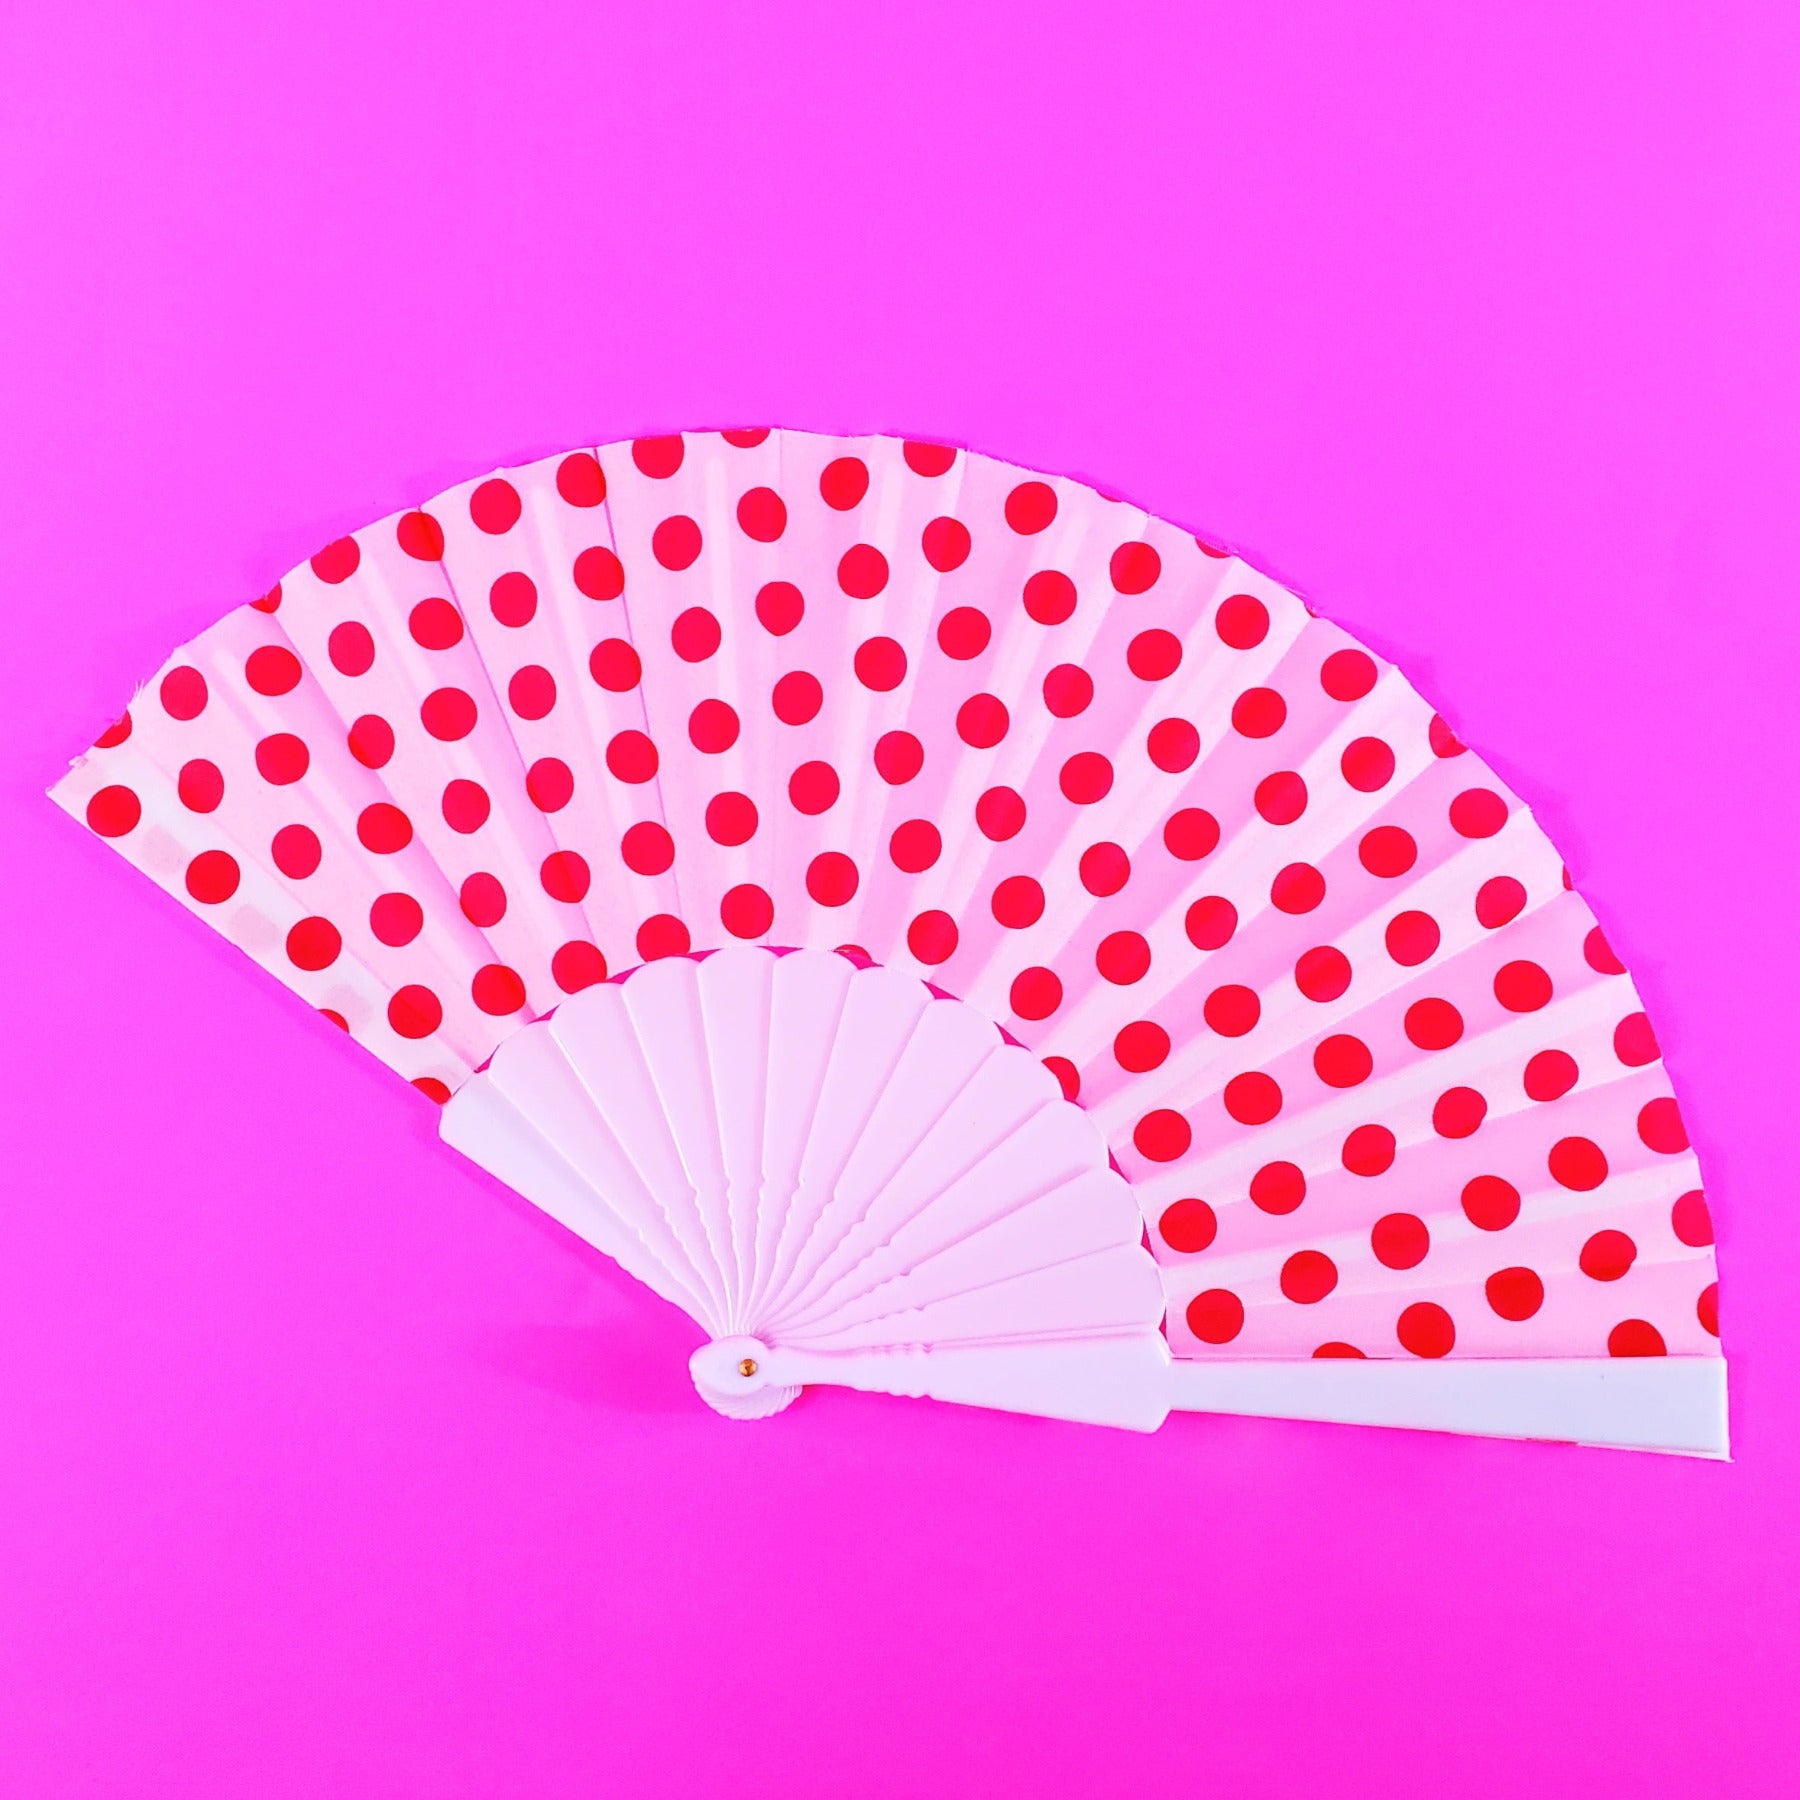 white with red polka dot print fabric folding fan with white plastic ribs